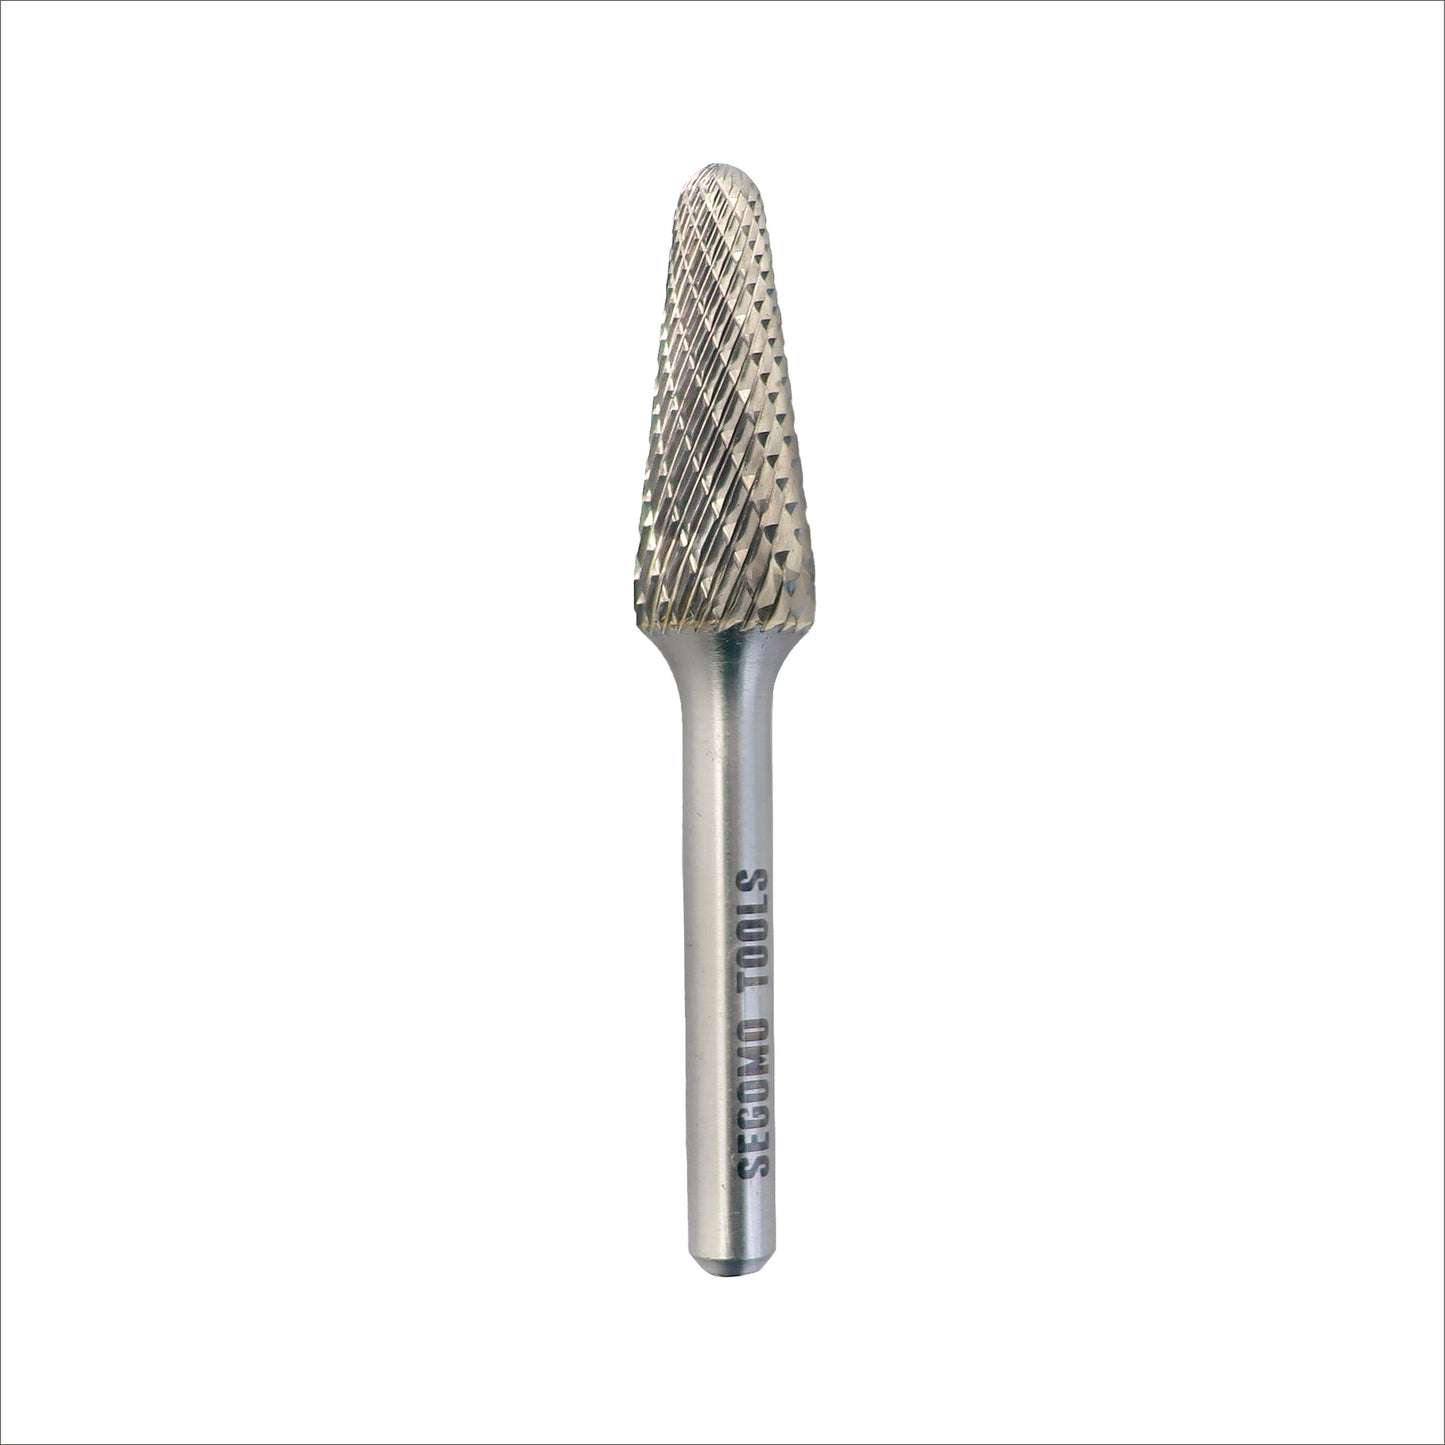 Segomo Tools Double Cut Rotary Tungsten Carbide Burrs For Grinding, Metal Deburring, Carving, Drilling, Engraving